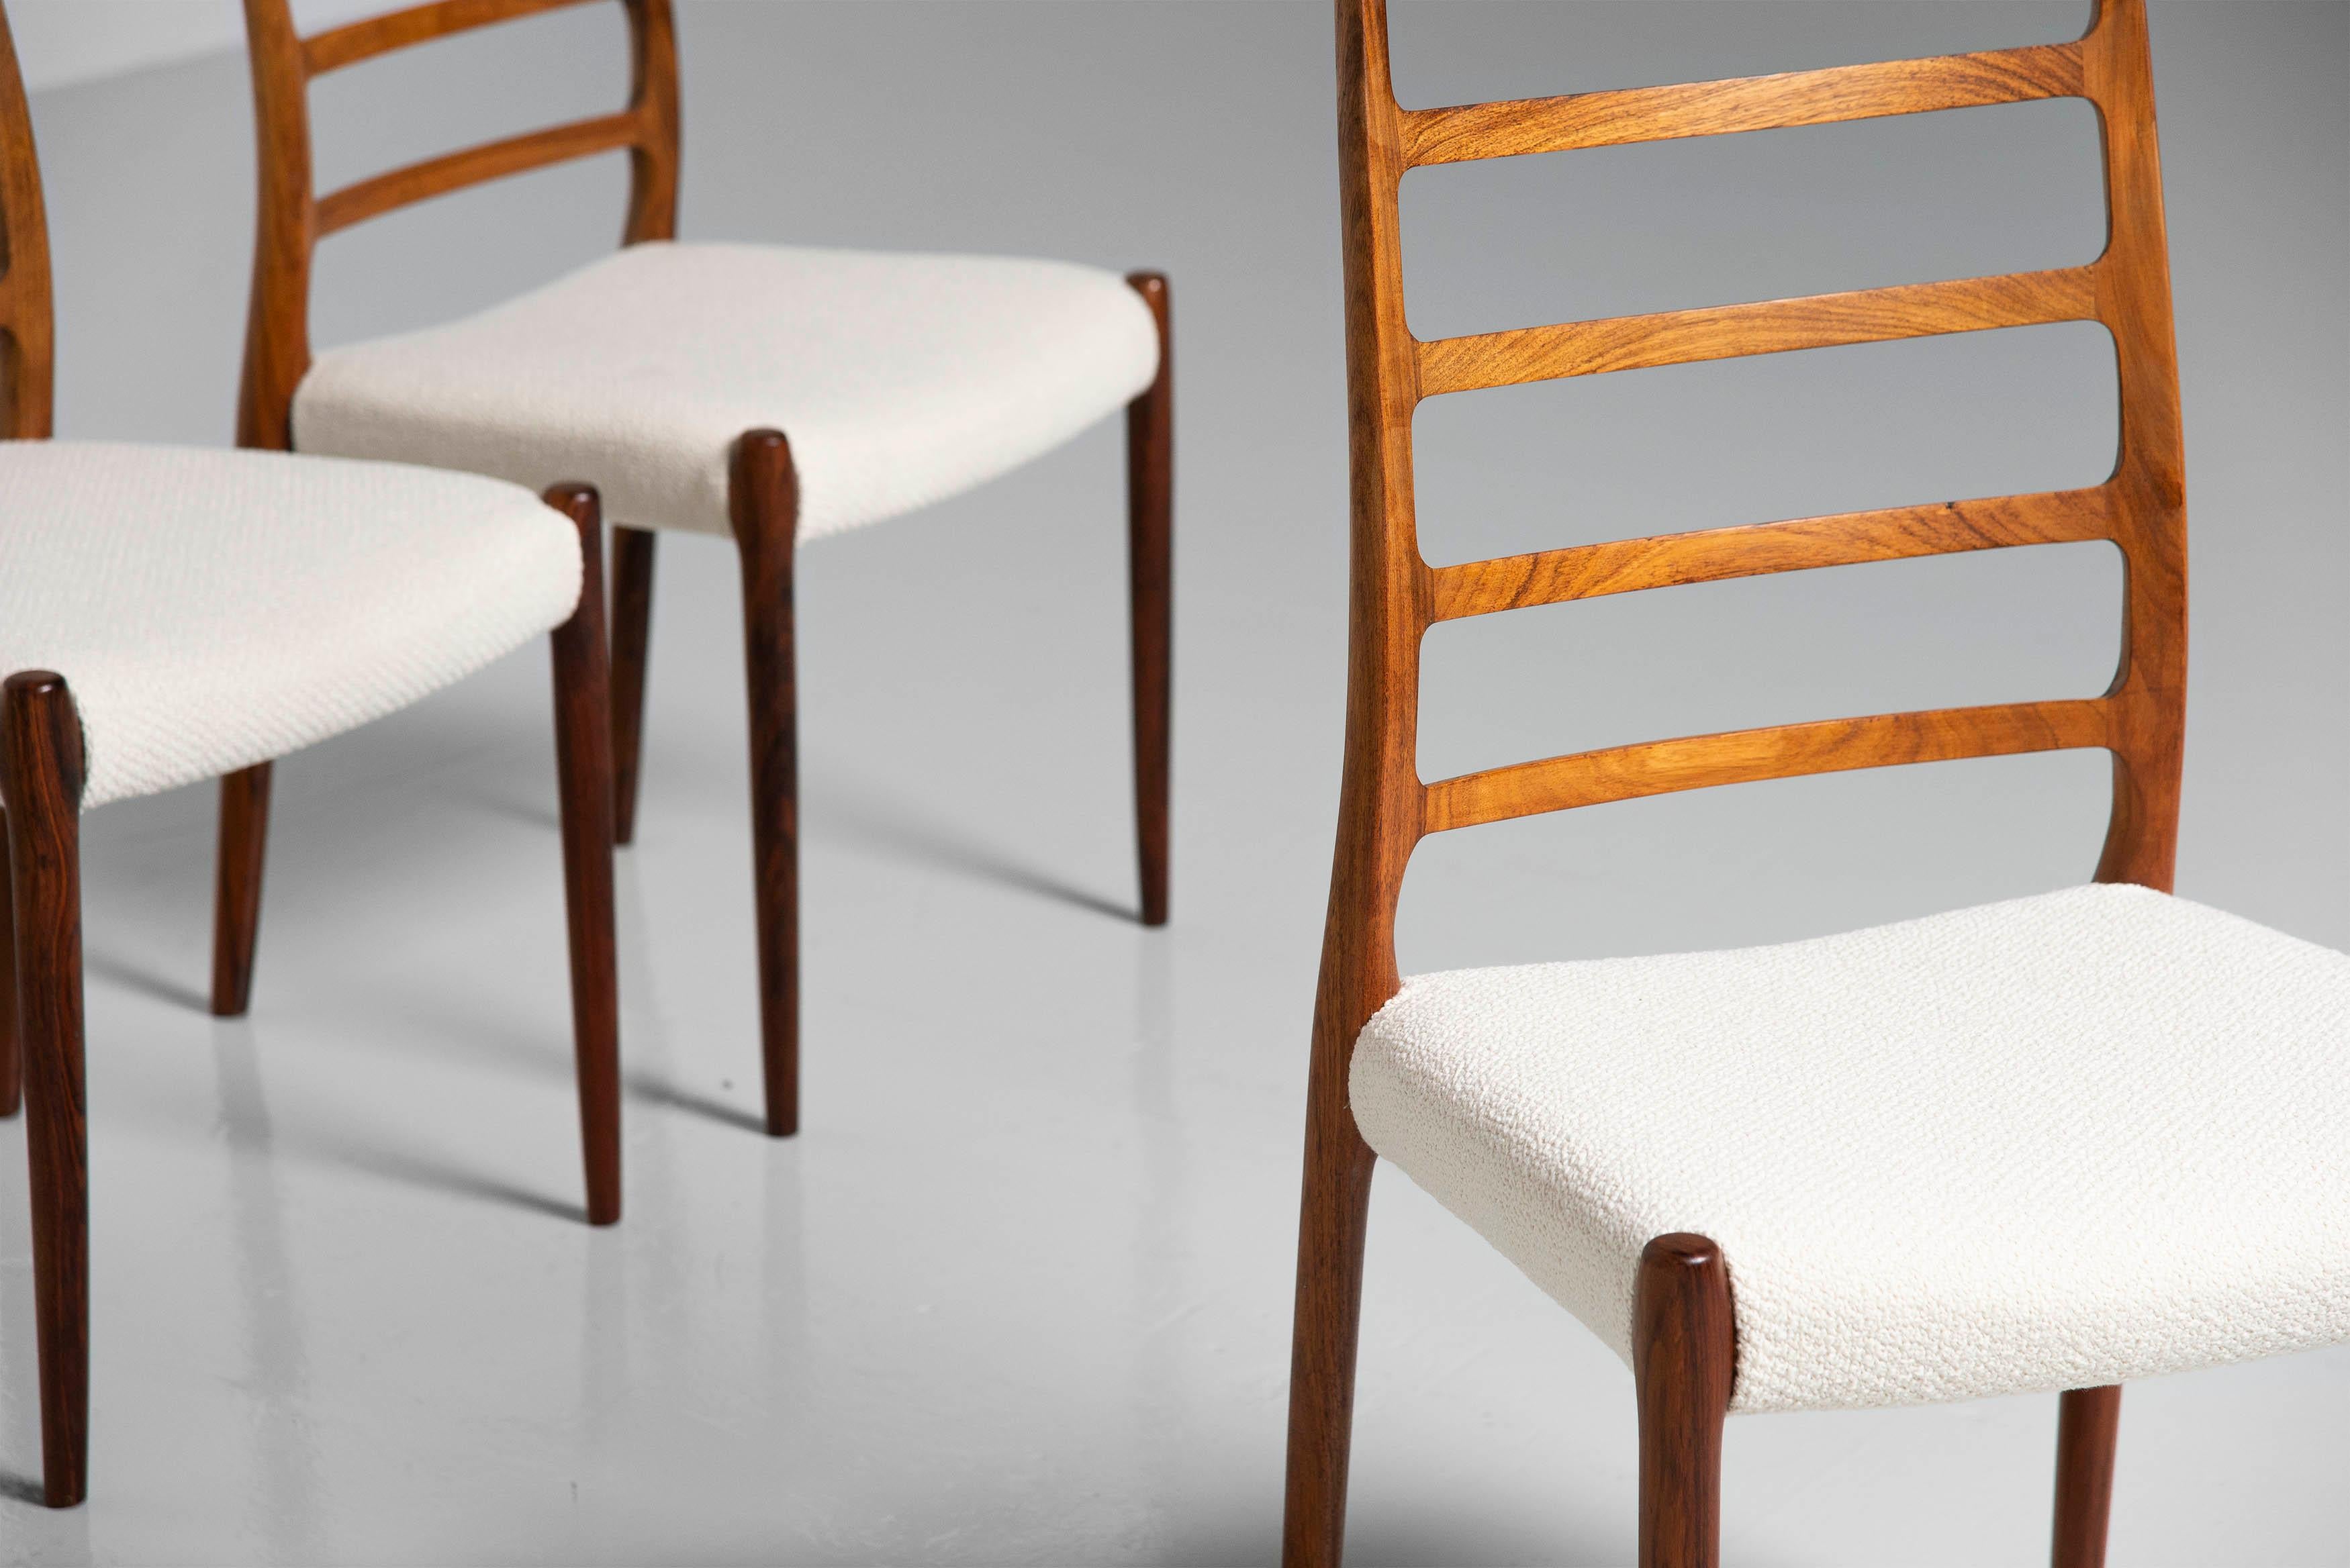 Highly sophisticated set of 6 dining chairs model 82 designed by Niels Moller and manufactured by J.L. Møller Mobelfabrik, Denmark 1971. These chairs are made or rosewood and have newly upholstered off white seats. The rosewood has a beautiful faded